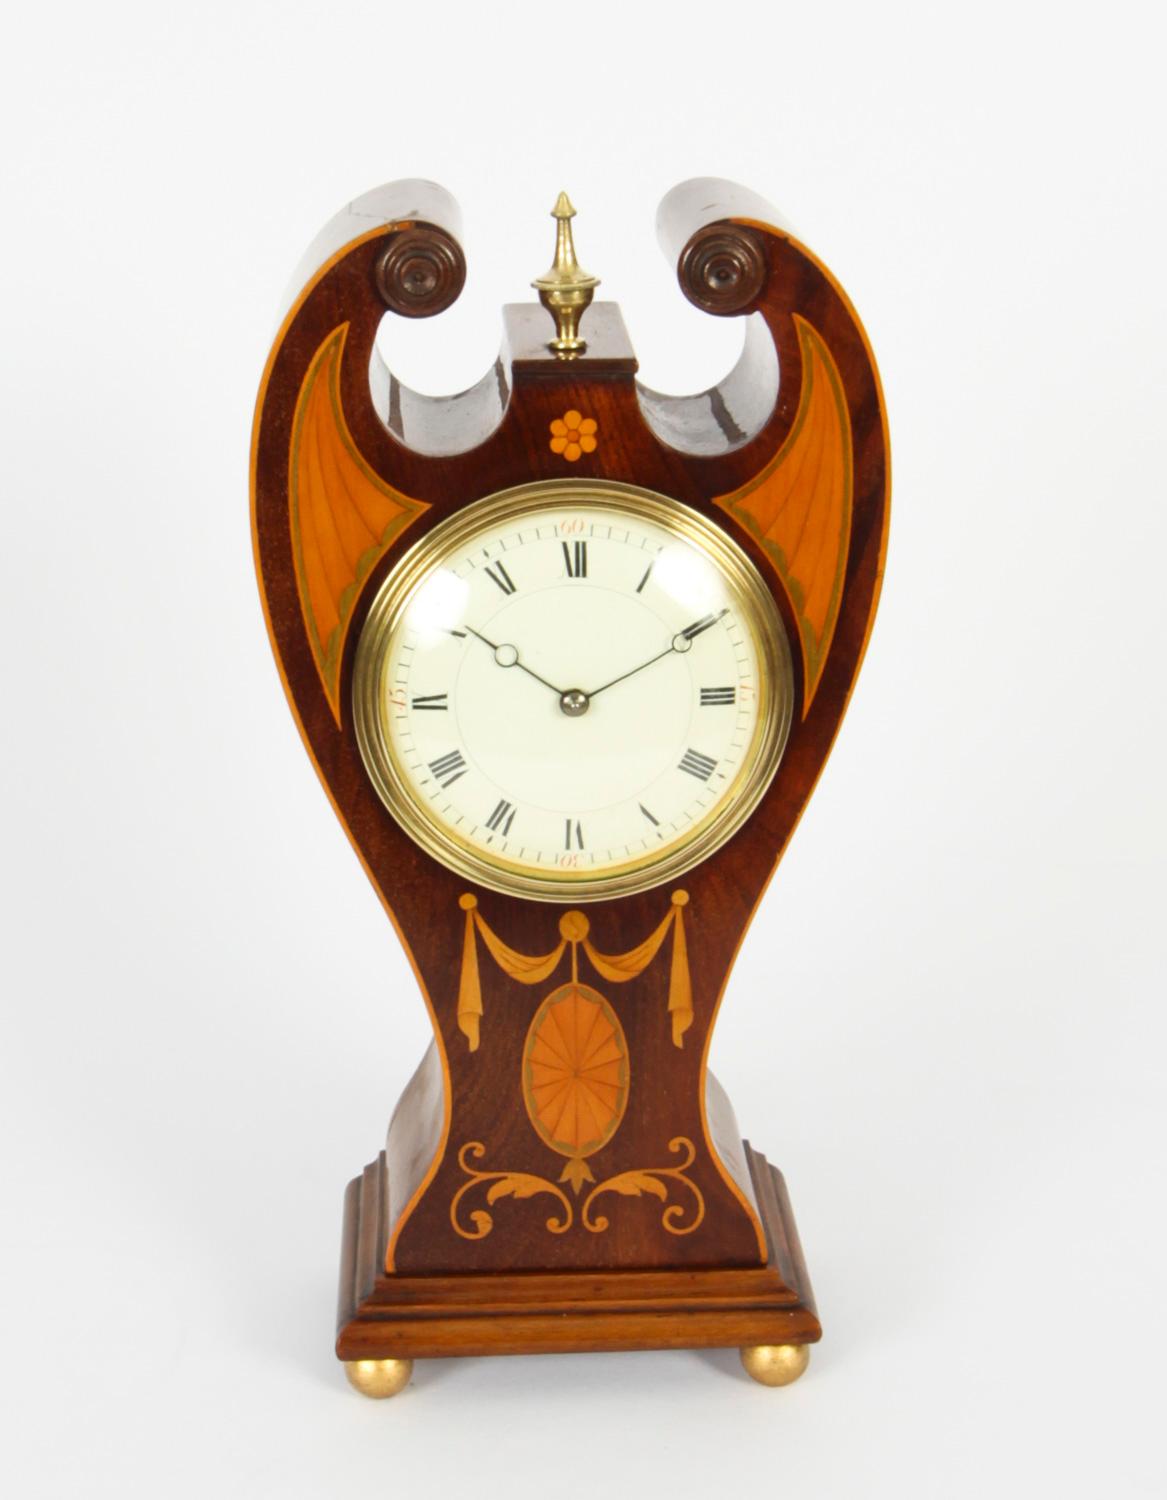 This is a pretty antique Edwardian inlaid mahogany mantel clock, circa 1900 in date,  complete with the original winding key.

It has a beautiful beautiful shaped case with string inlay, ribbon and garland and  conch shell detail, with enamelled